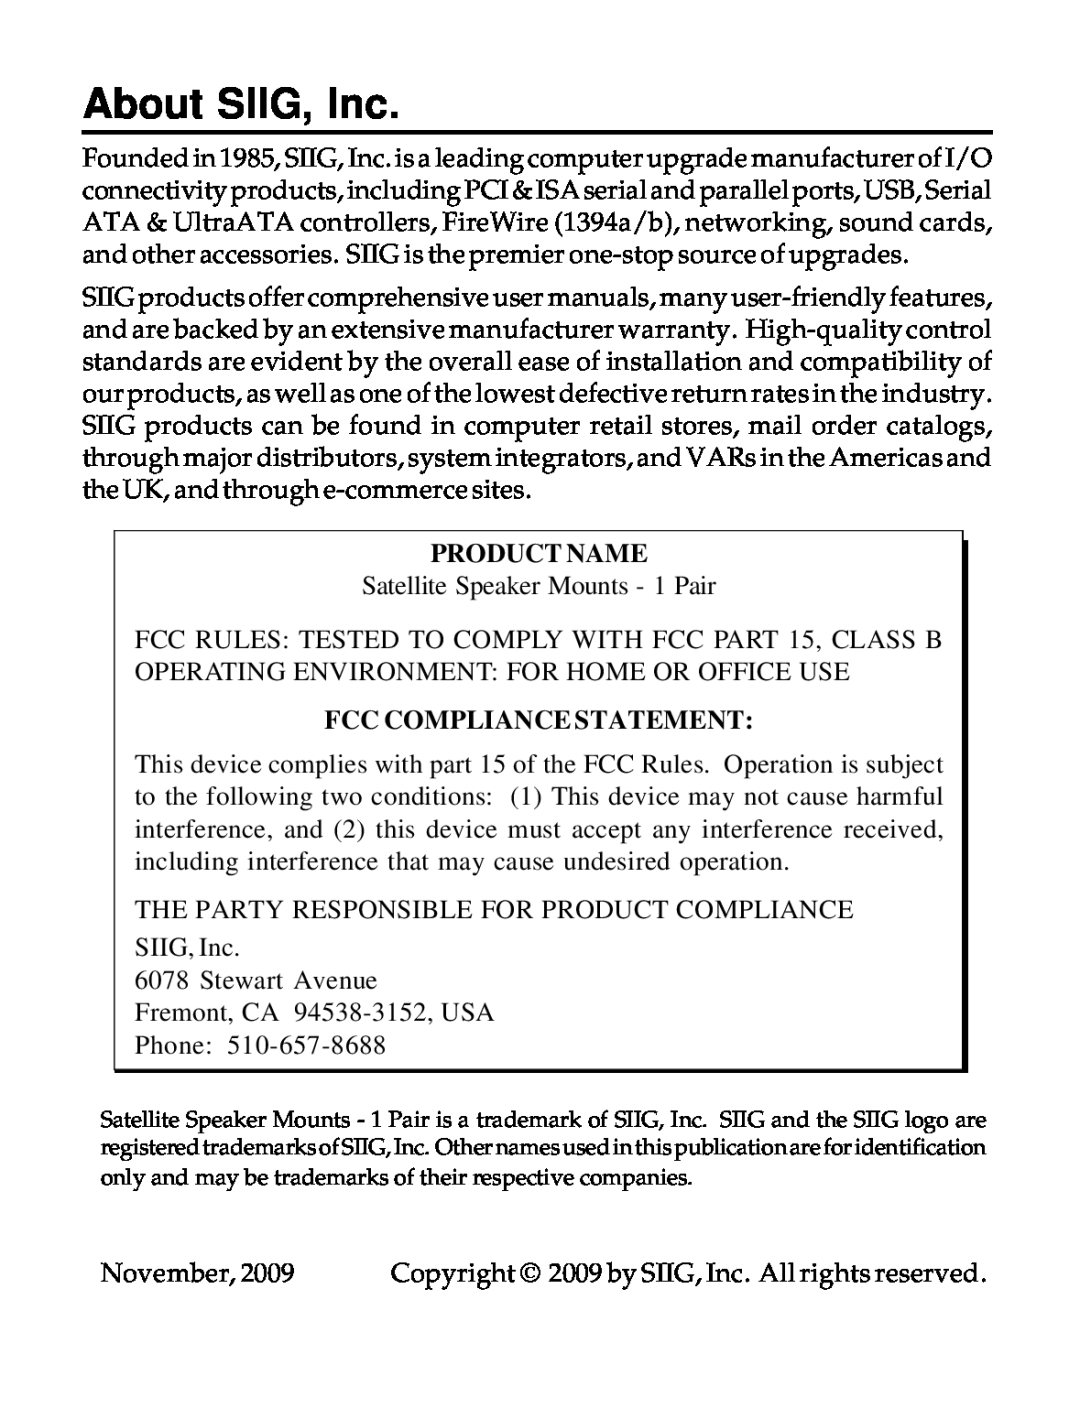 SIIG 04-0600A manual About SIIG, Inc, Product Name, Fcc Compliance Statement 